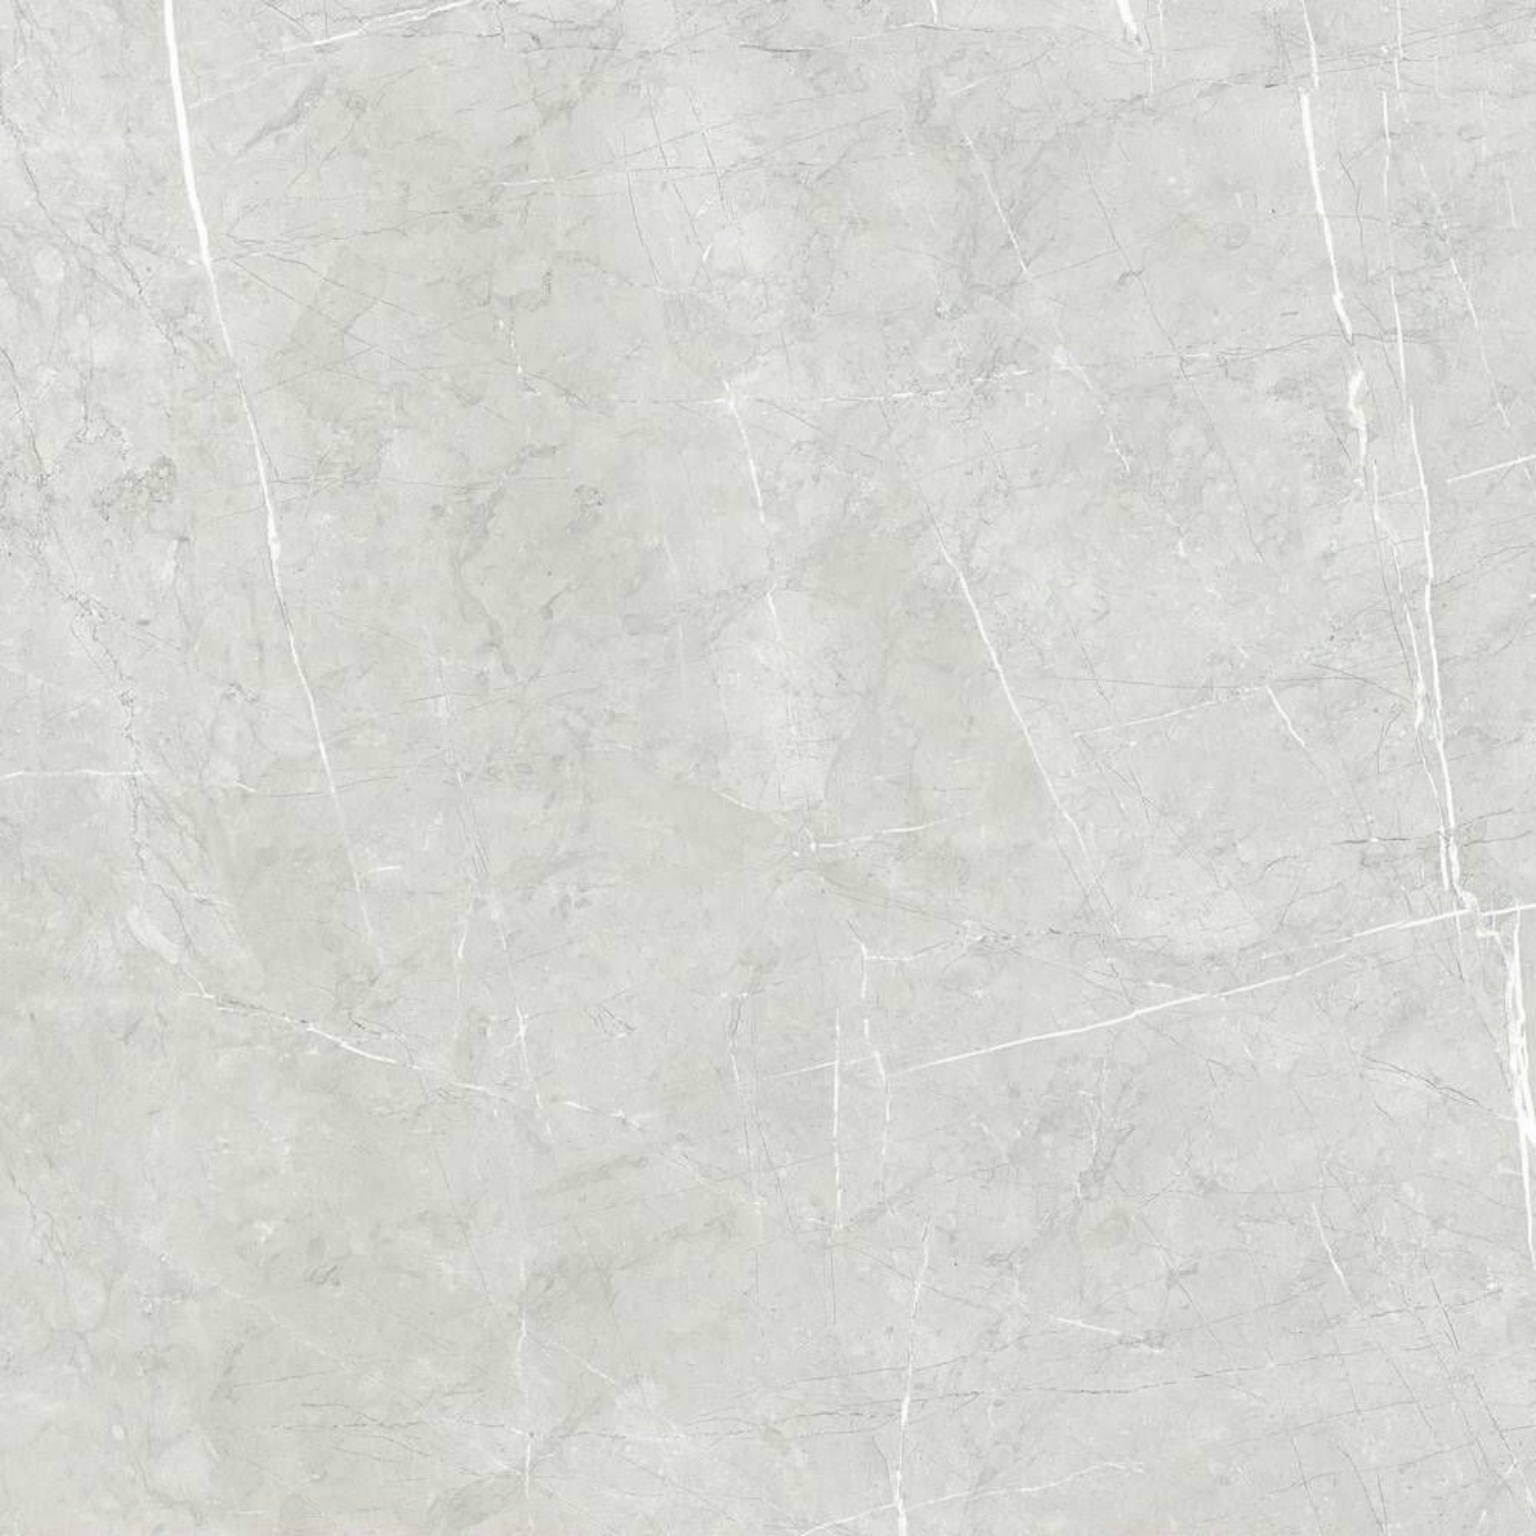 Lyon Perla Polished | Stones & More | Finest selection of Mosaics, Glass, Tile and Stone